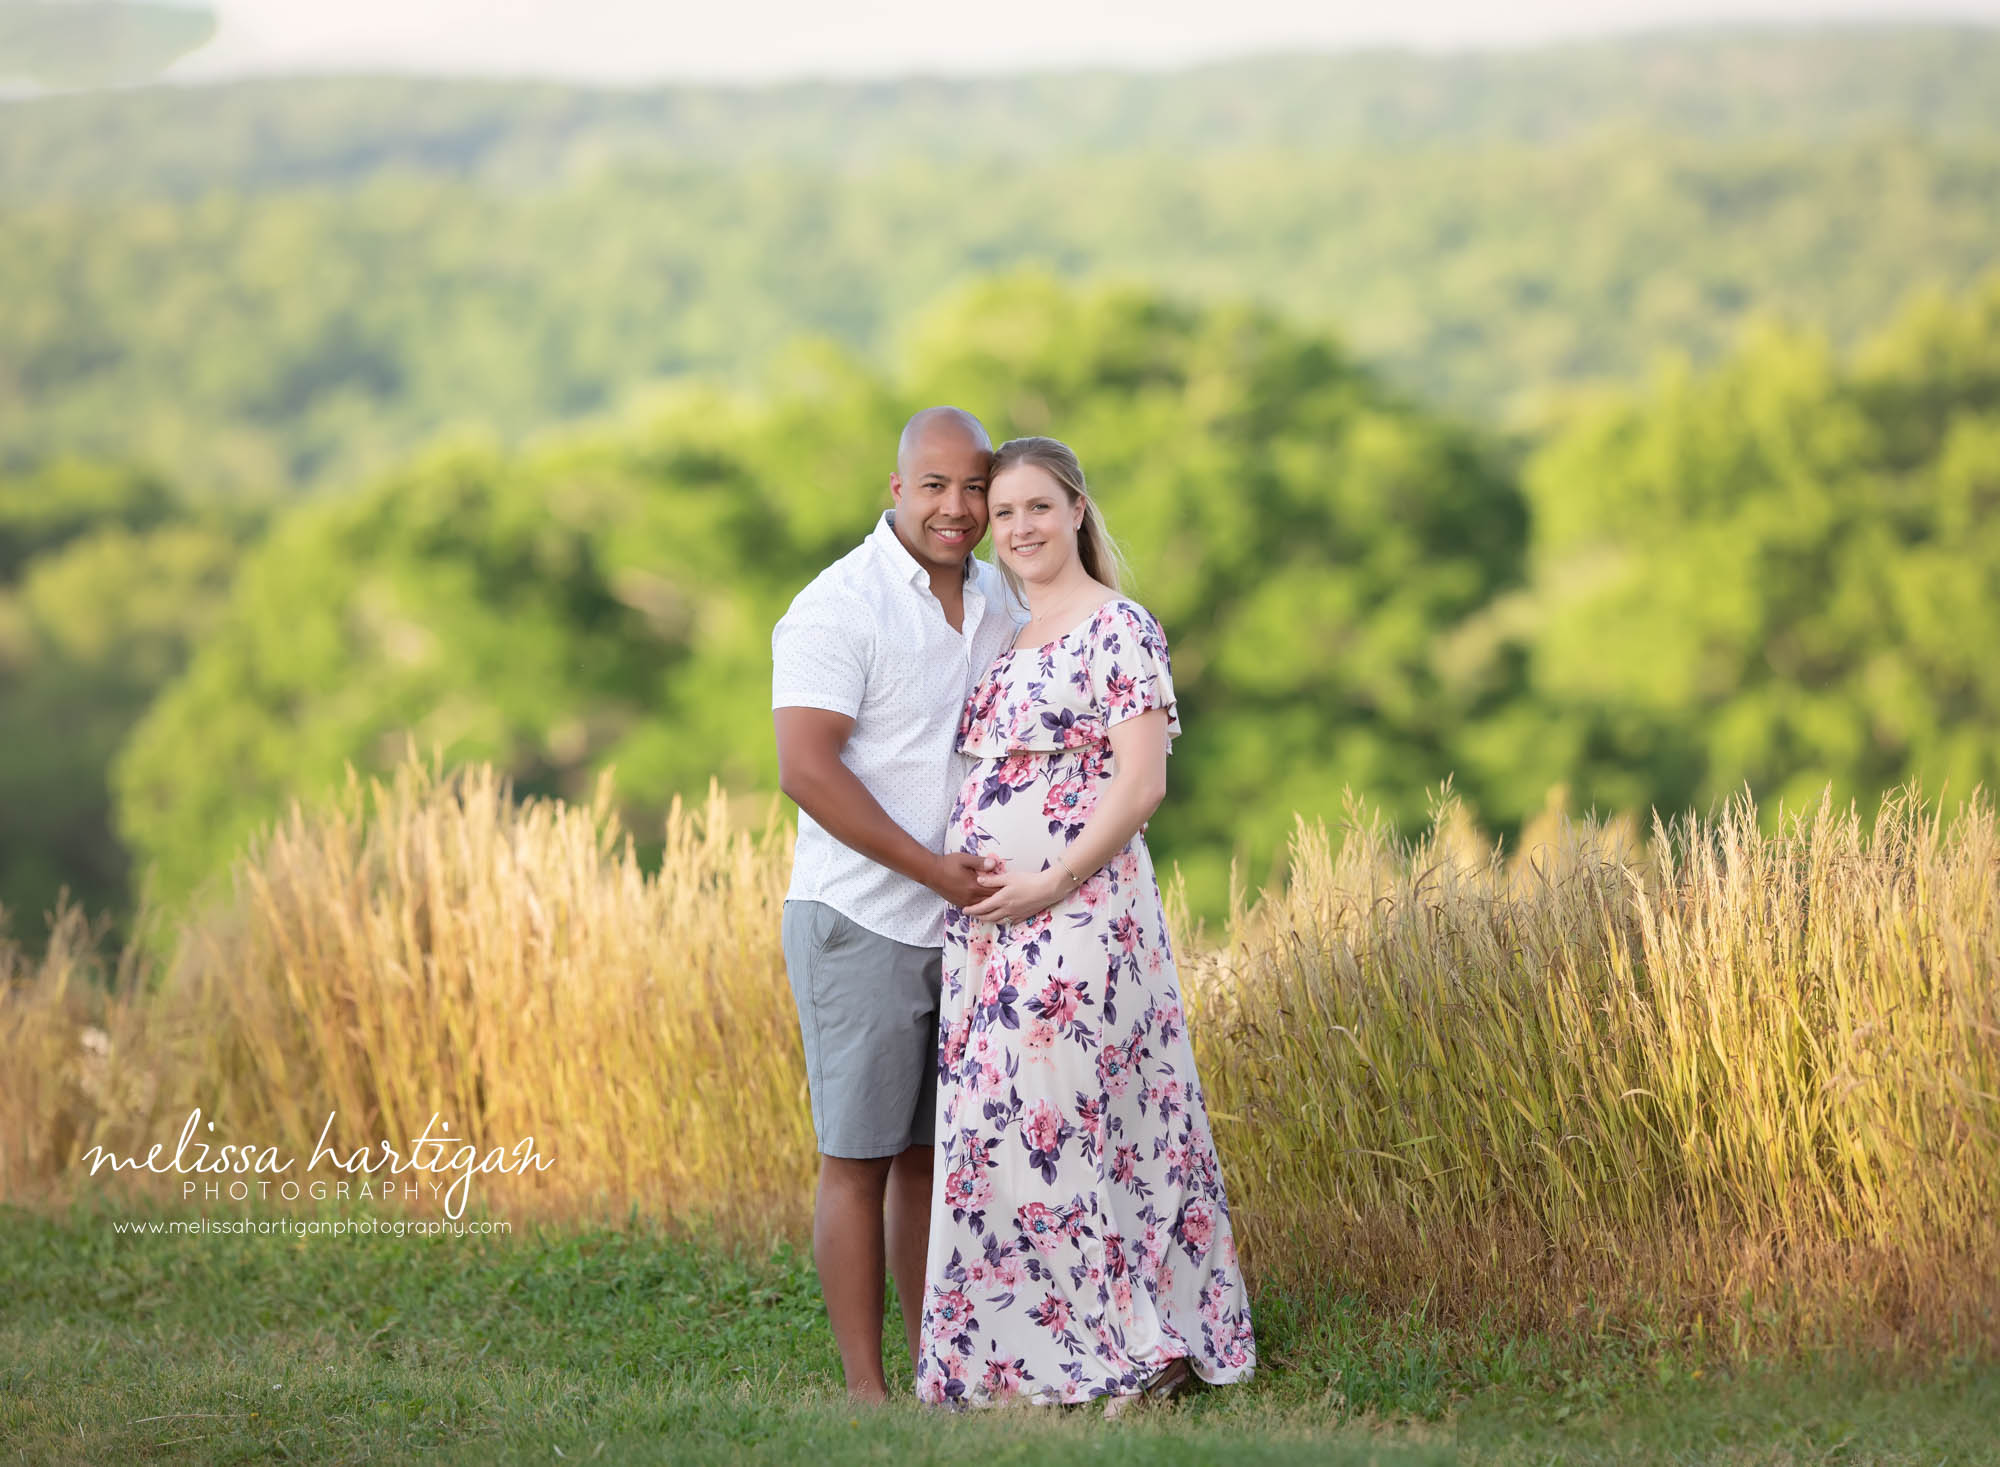 pregnancy mom wearing pink and purple floral dress standing couples maternity picture with mom-to-be and dad-to-be